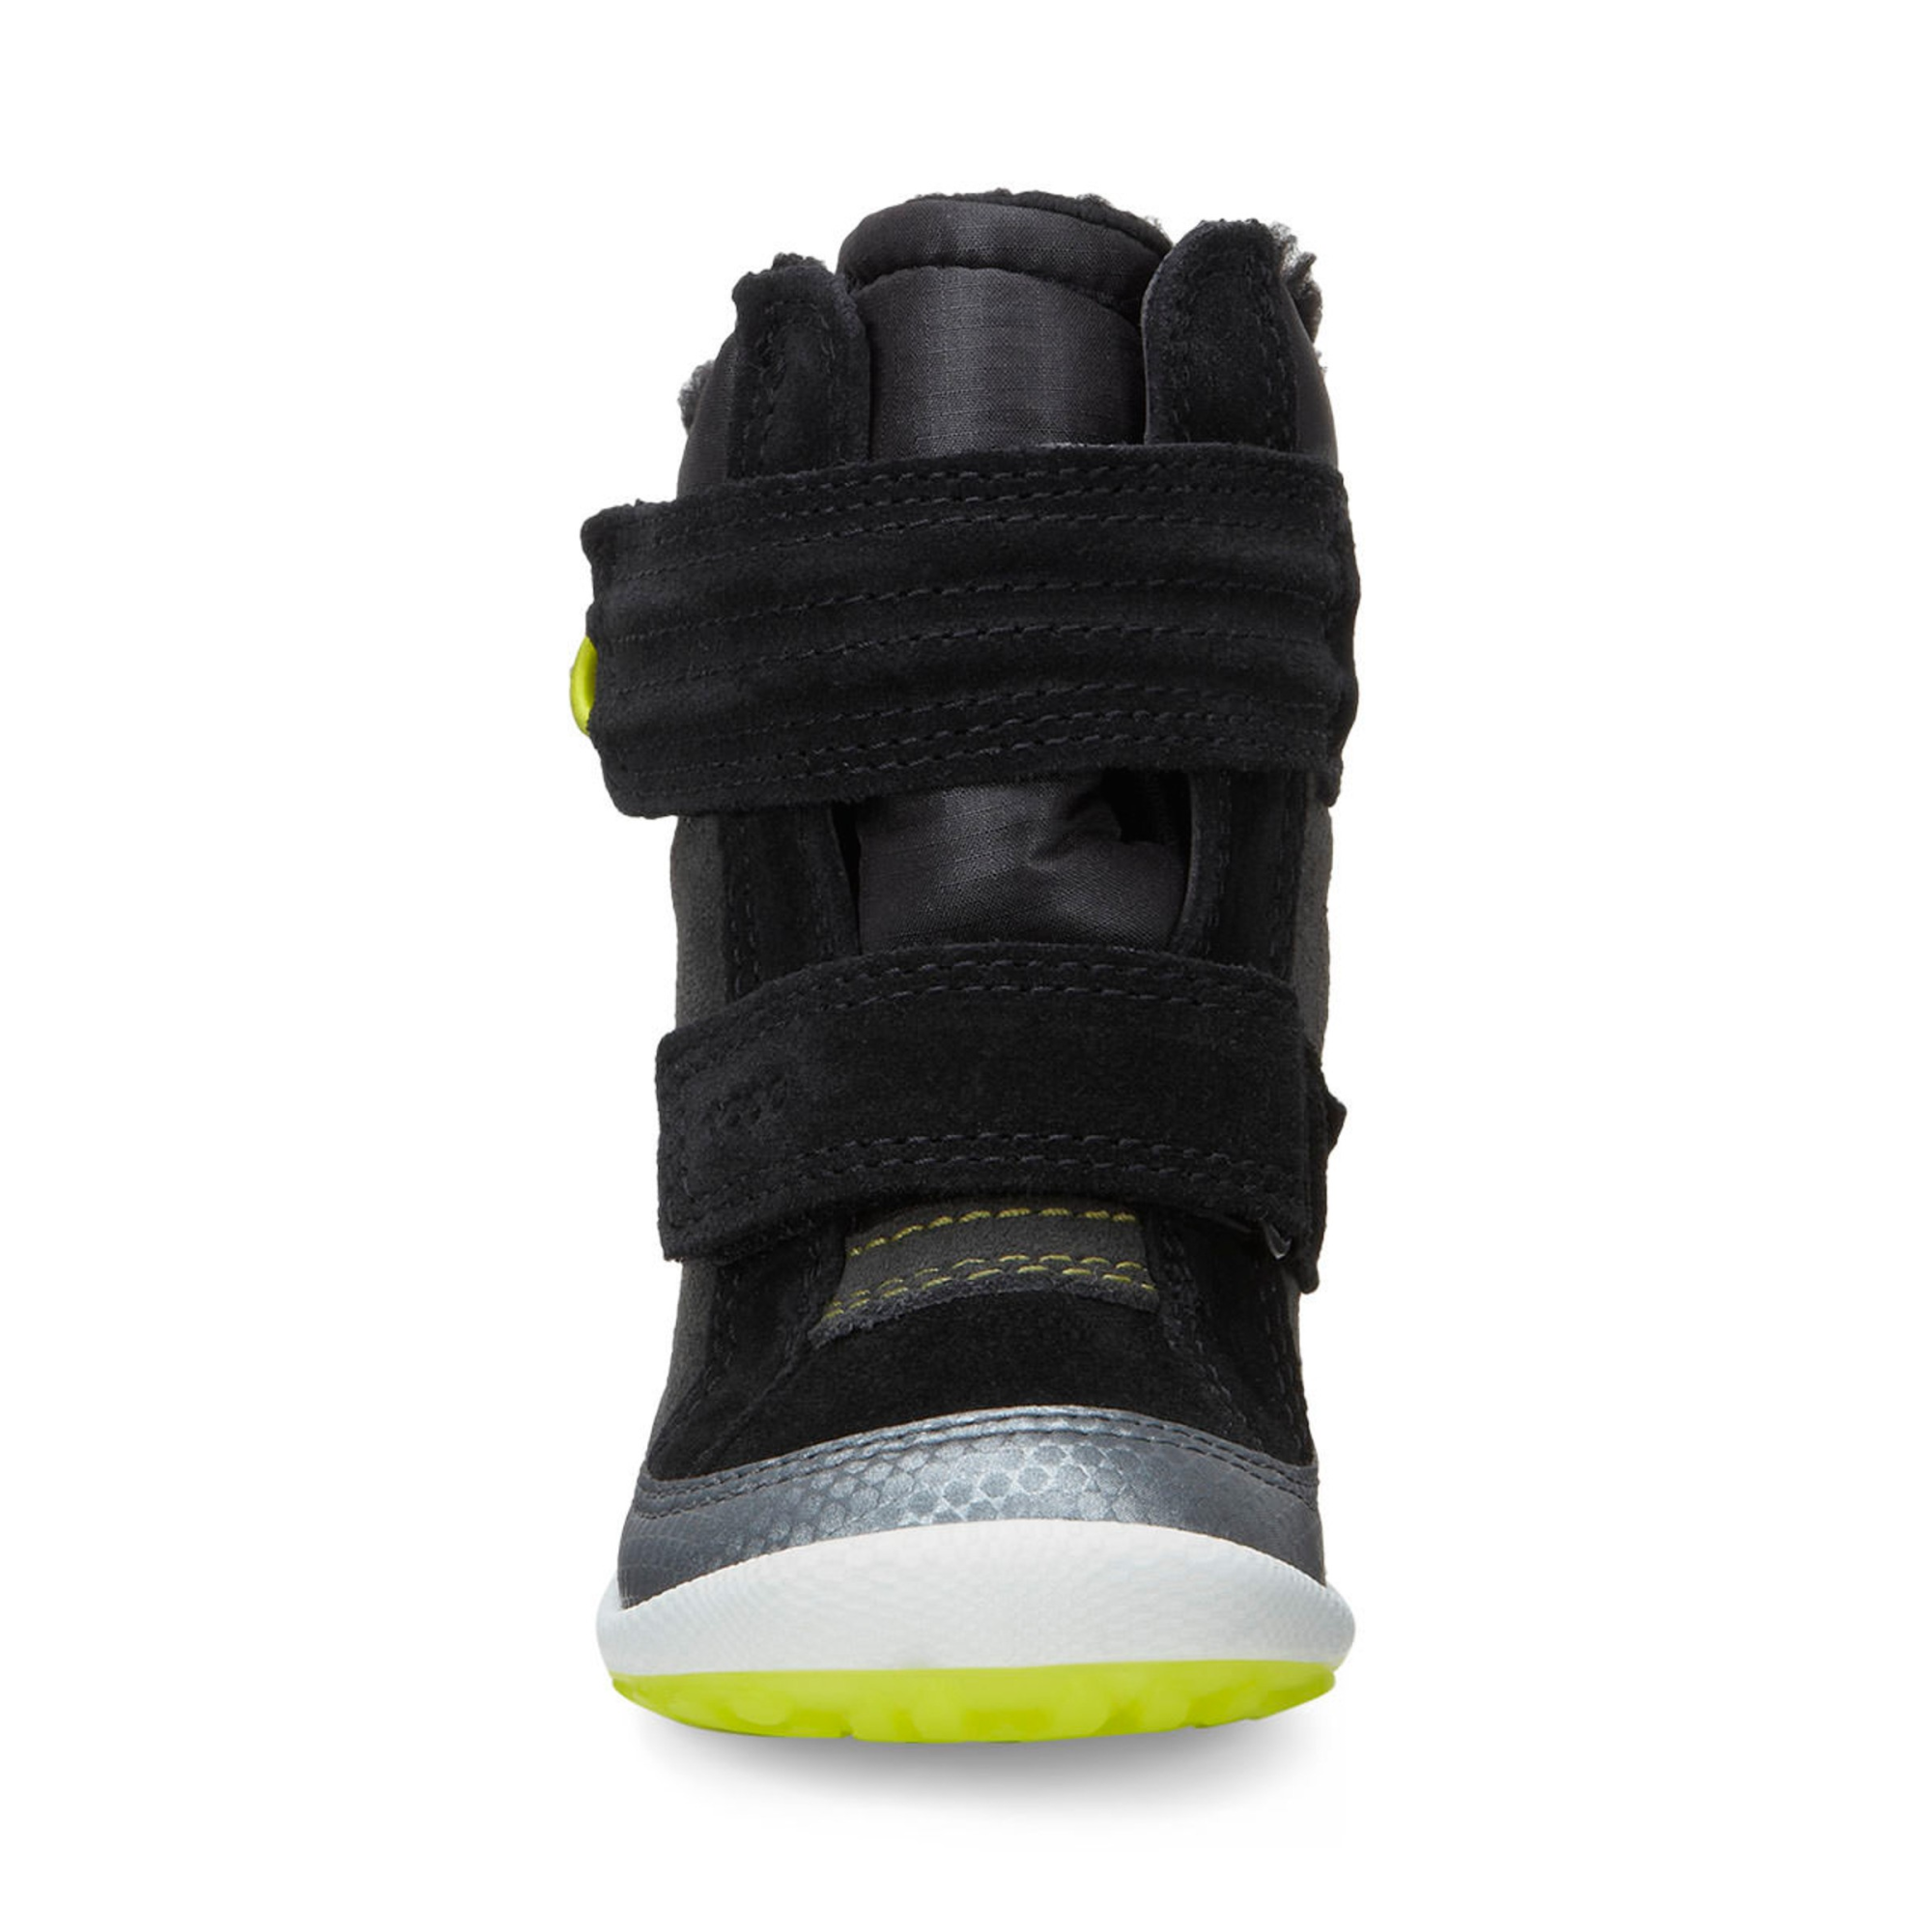 Ecco BIOM Lite Infant Boot - Products - Veryk Mall - Veryk many product, quick response, safe your money!